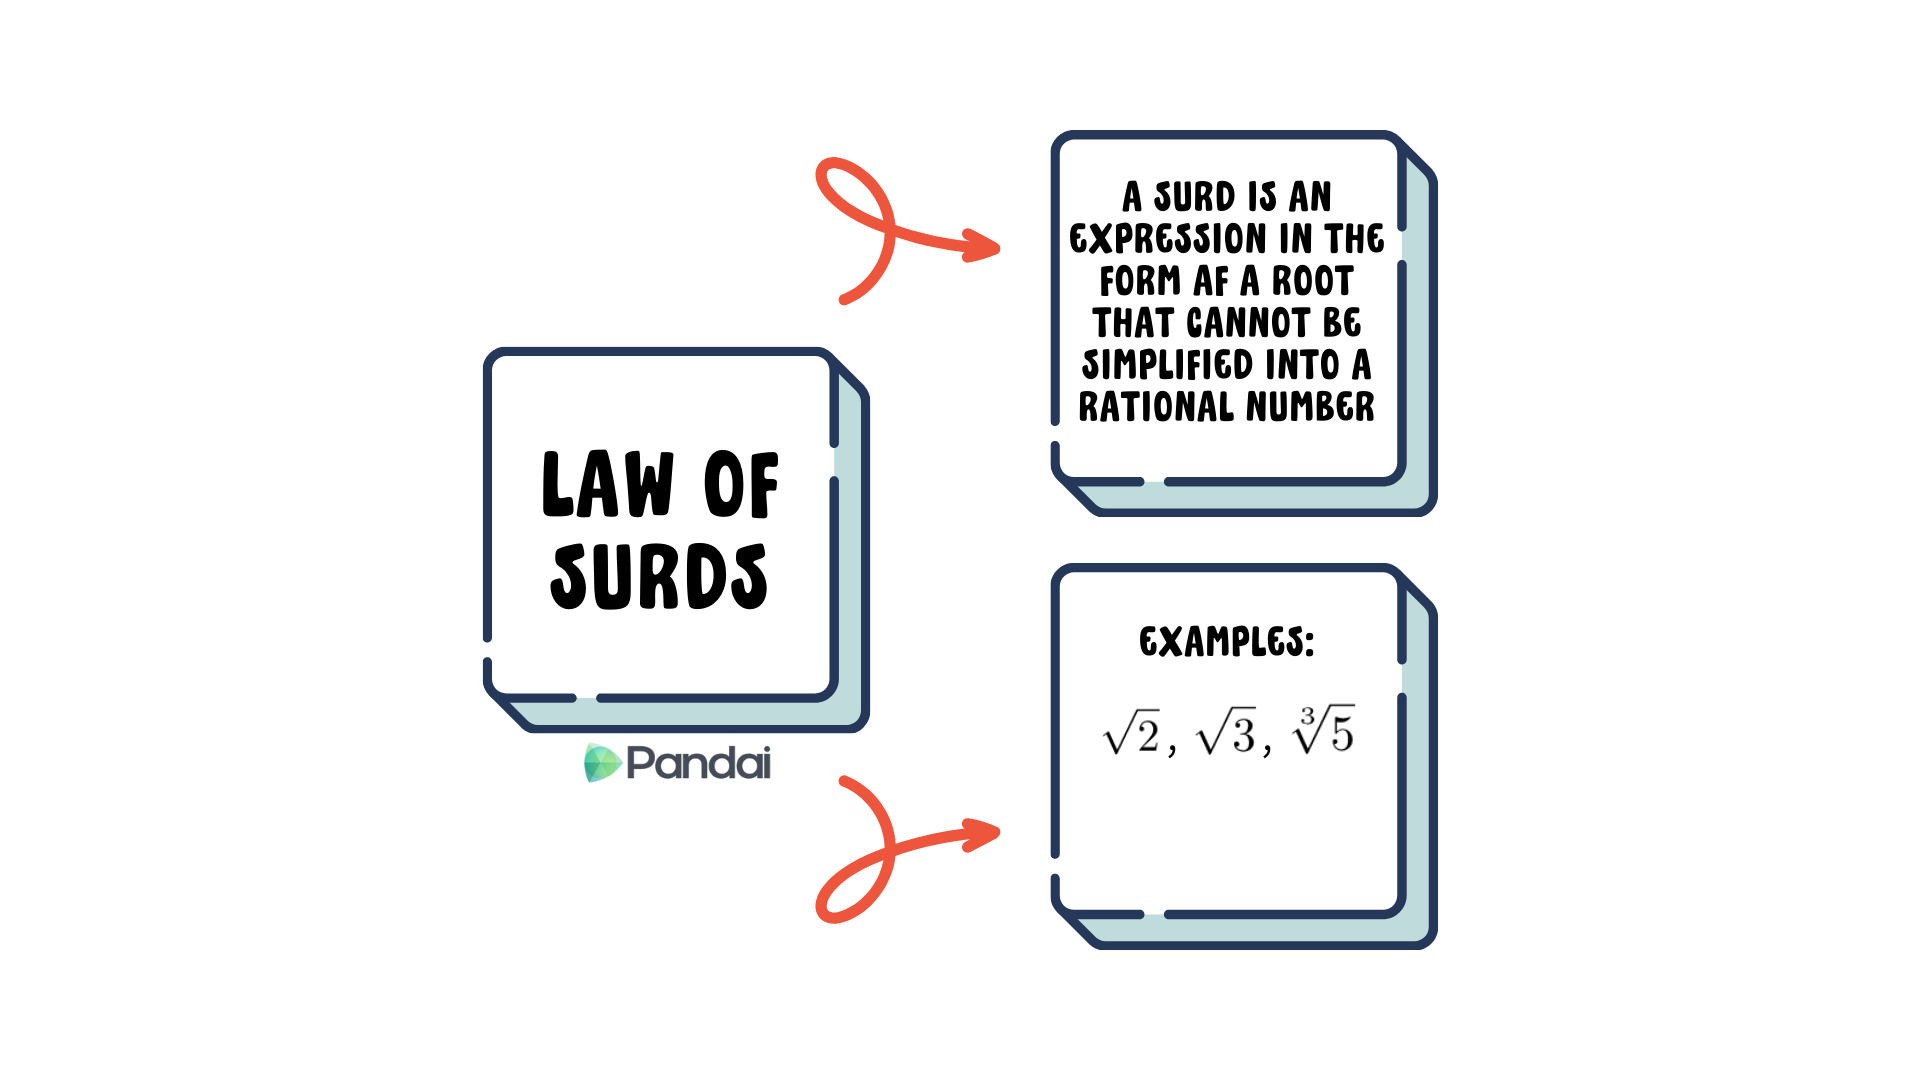 This image contains three main elements. On the left, there is a box with the text ‘LAW OF SURDS’ and a small logo below it. On the top right, there is another box with the text ‘A SURD IS AN EXPRESSION IN THE FORM OF A ROOT THAT CANNOT BE SIMPLIFIED INTO A RATIONAL NUMBER.’ Below that, there is a third box with the text ‘EXAMPLES: √2, √3, √5.’ Arrows connect the left box to the two right boxes.